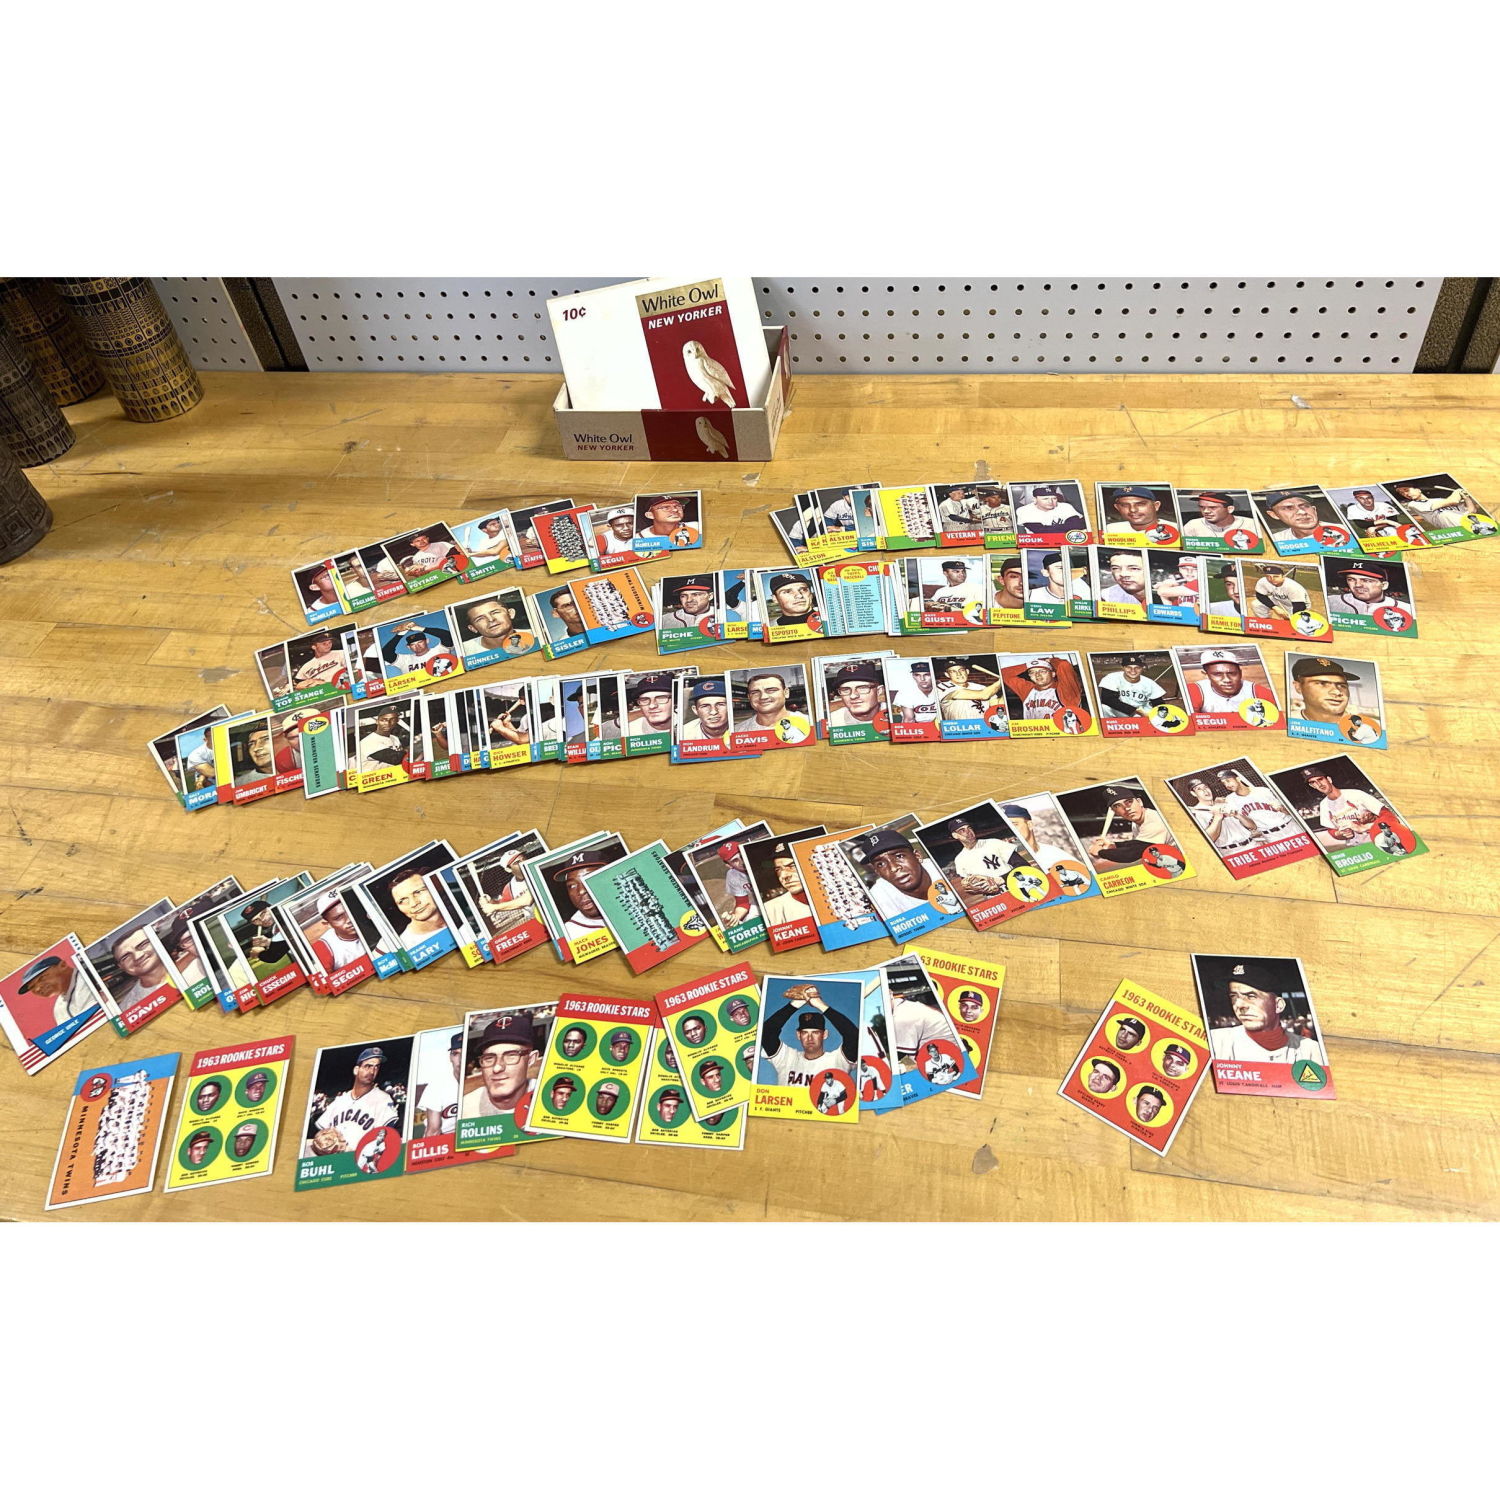 1963 Topps baseball cards approx 300+.